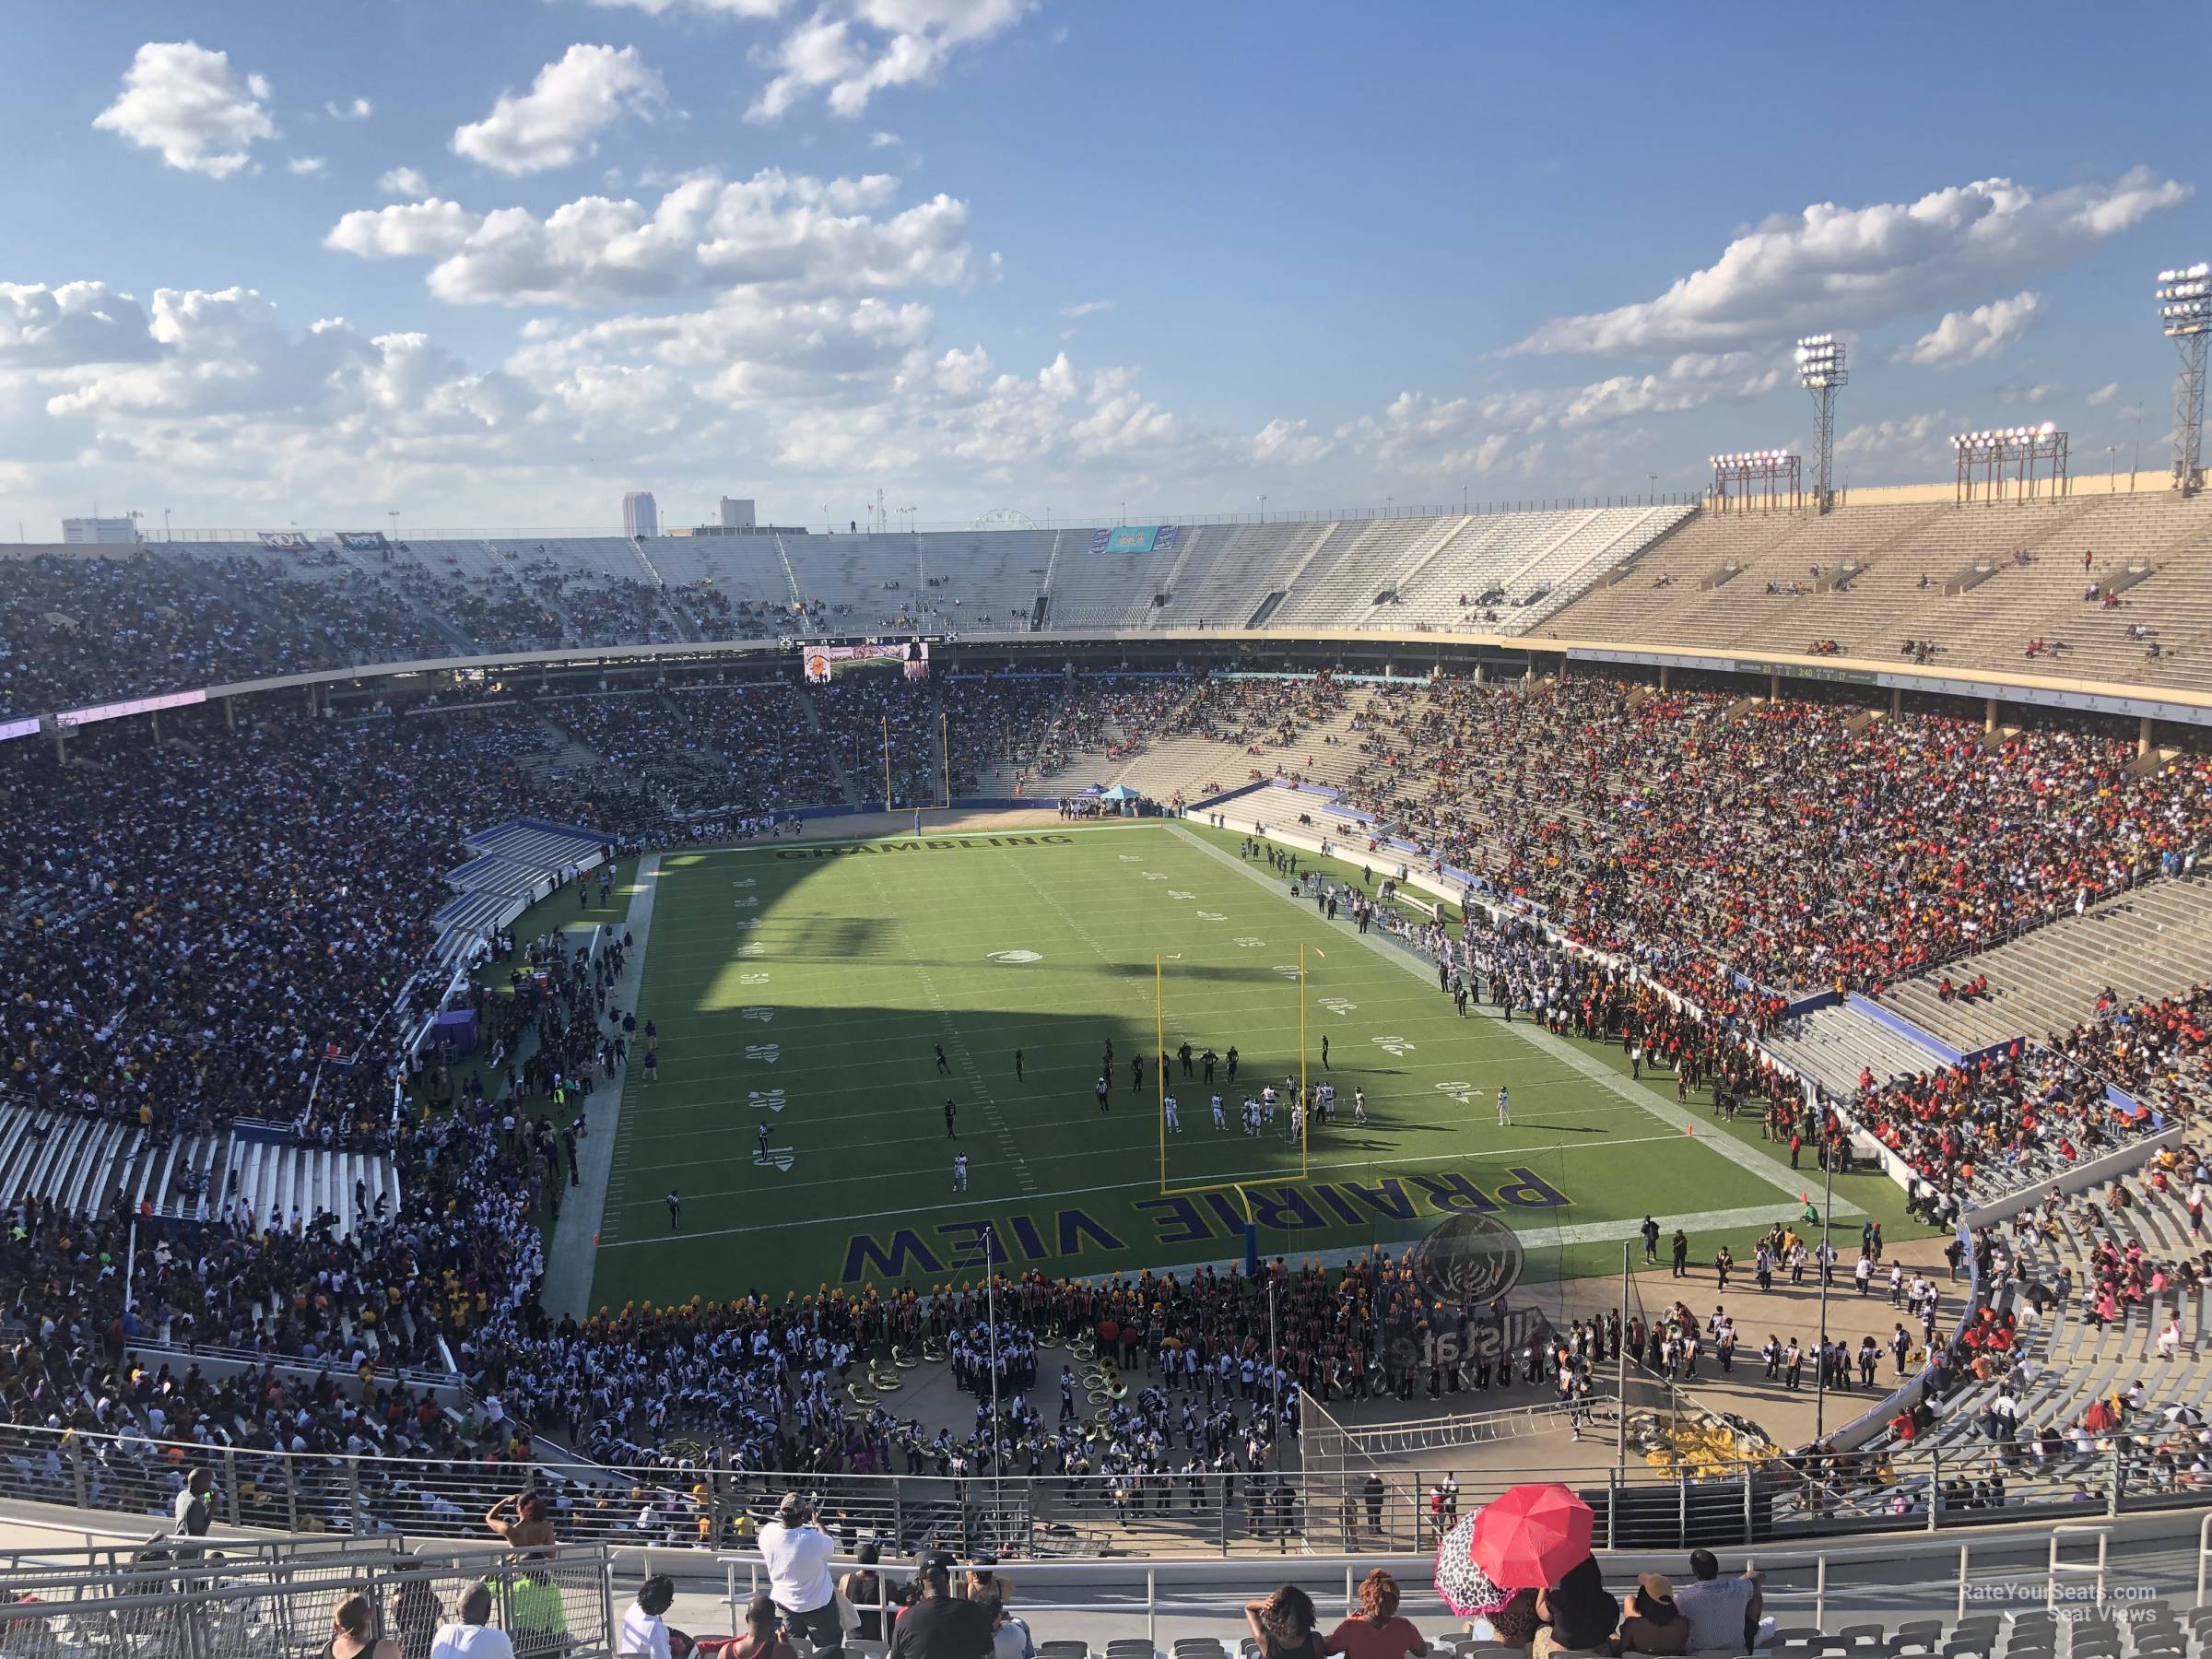 section 140, row 22 seat view  - cotton bowl